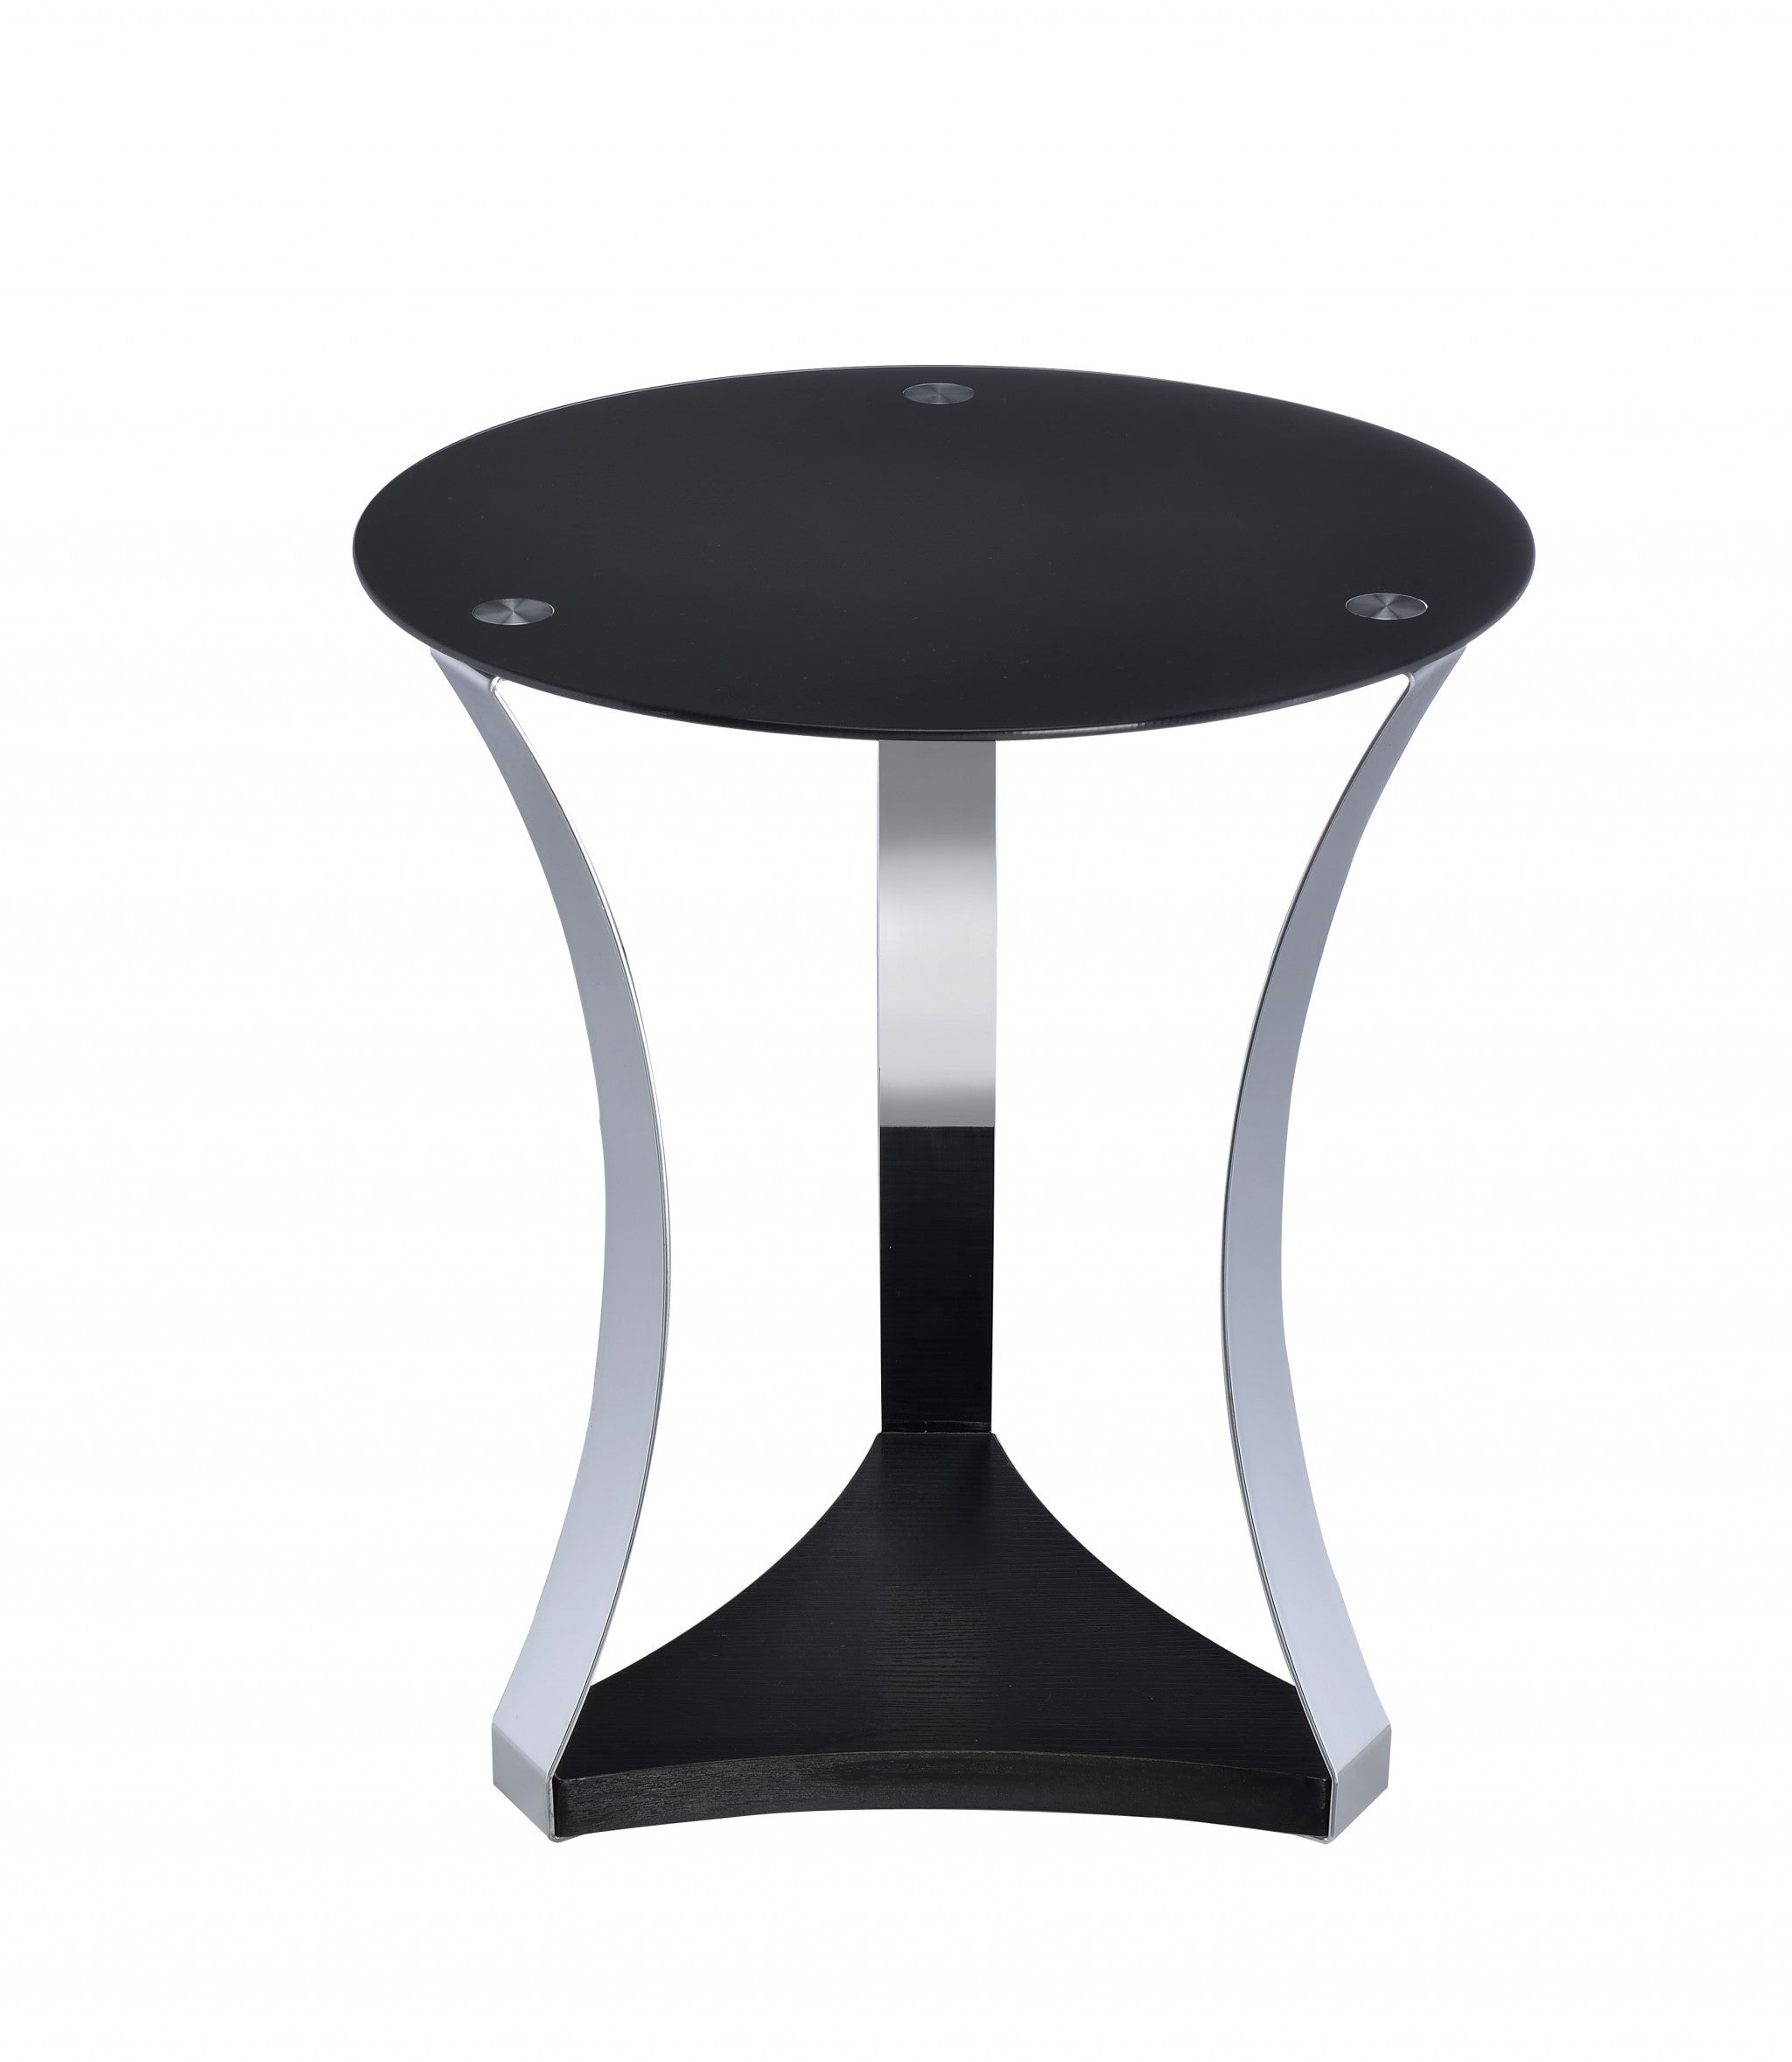 20" Silver And Black Mirrored Round End Table With Shelf